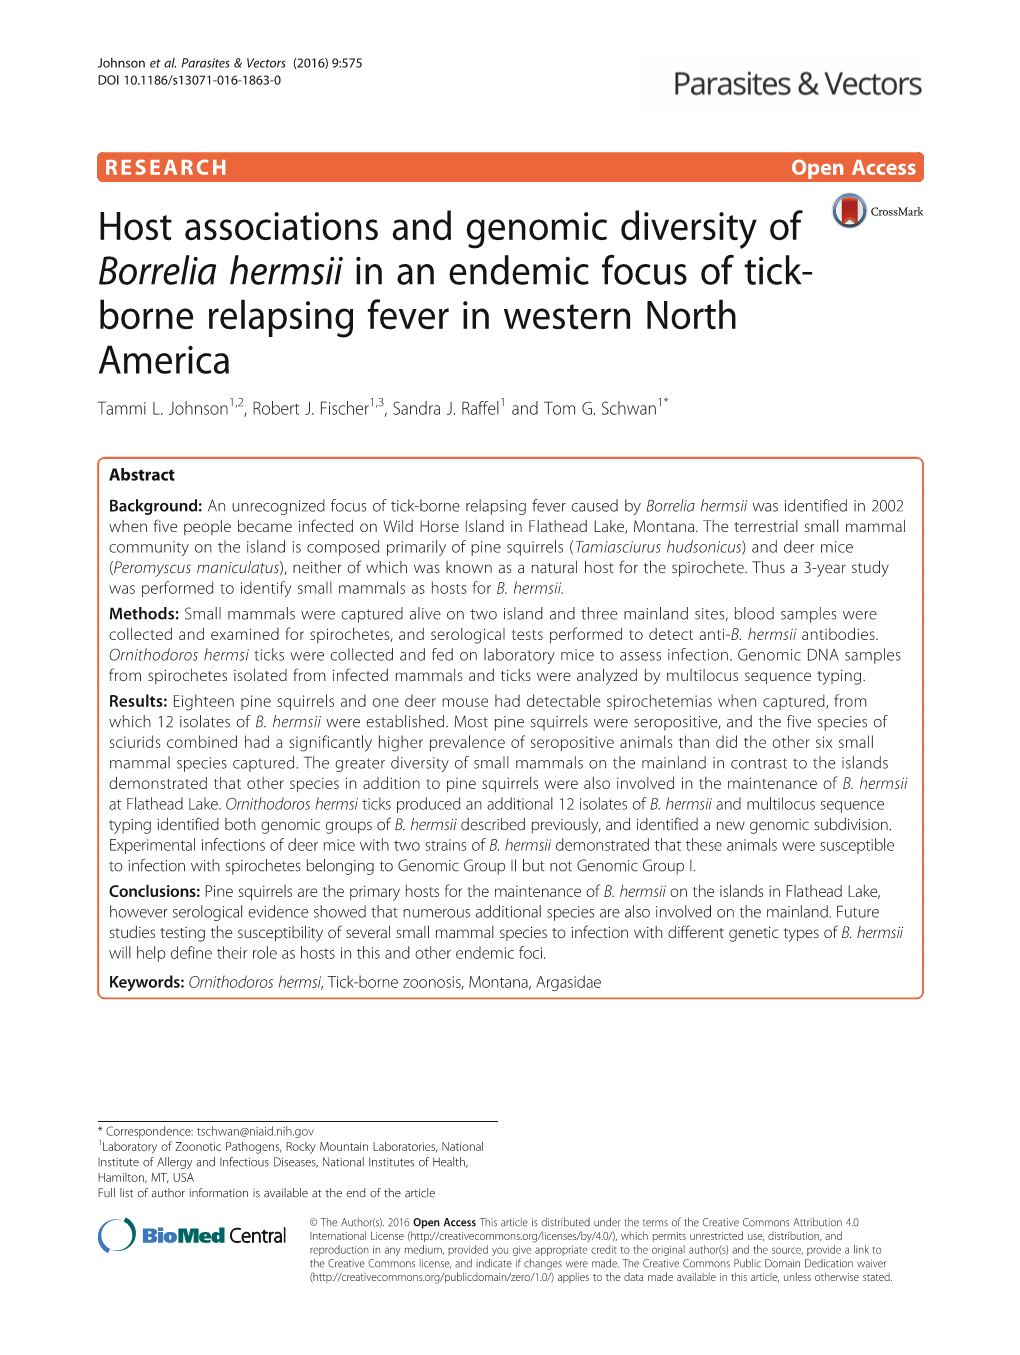 Host Associations and Genomic Diversity of Borrelia Hermsii in an Endemic Focus of Tick-Borne Relapsing Fever in Western North A